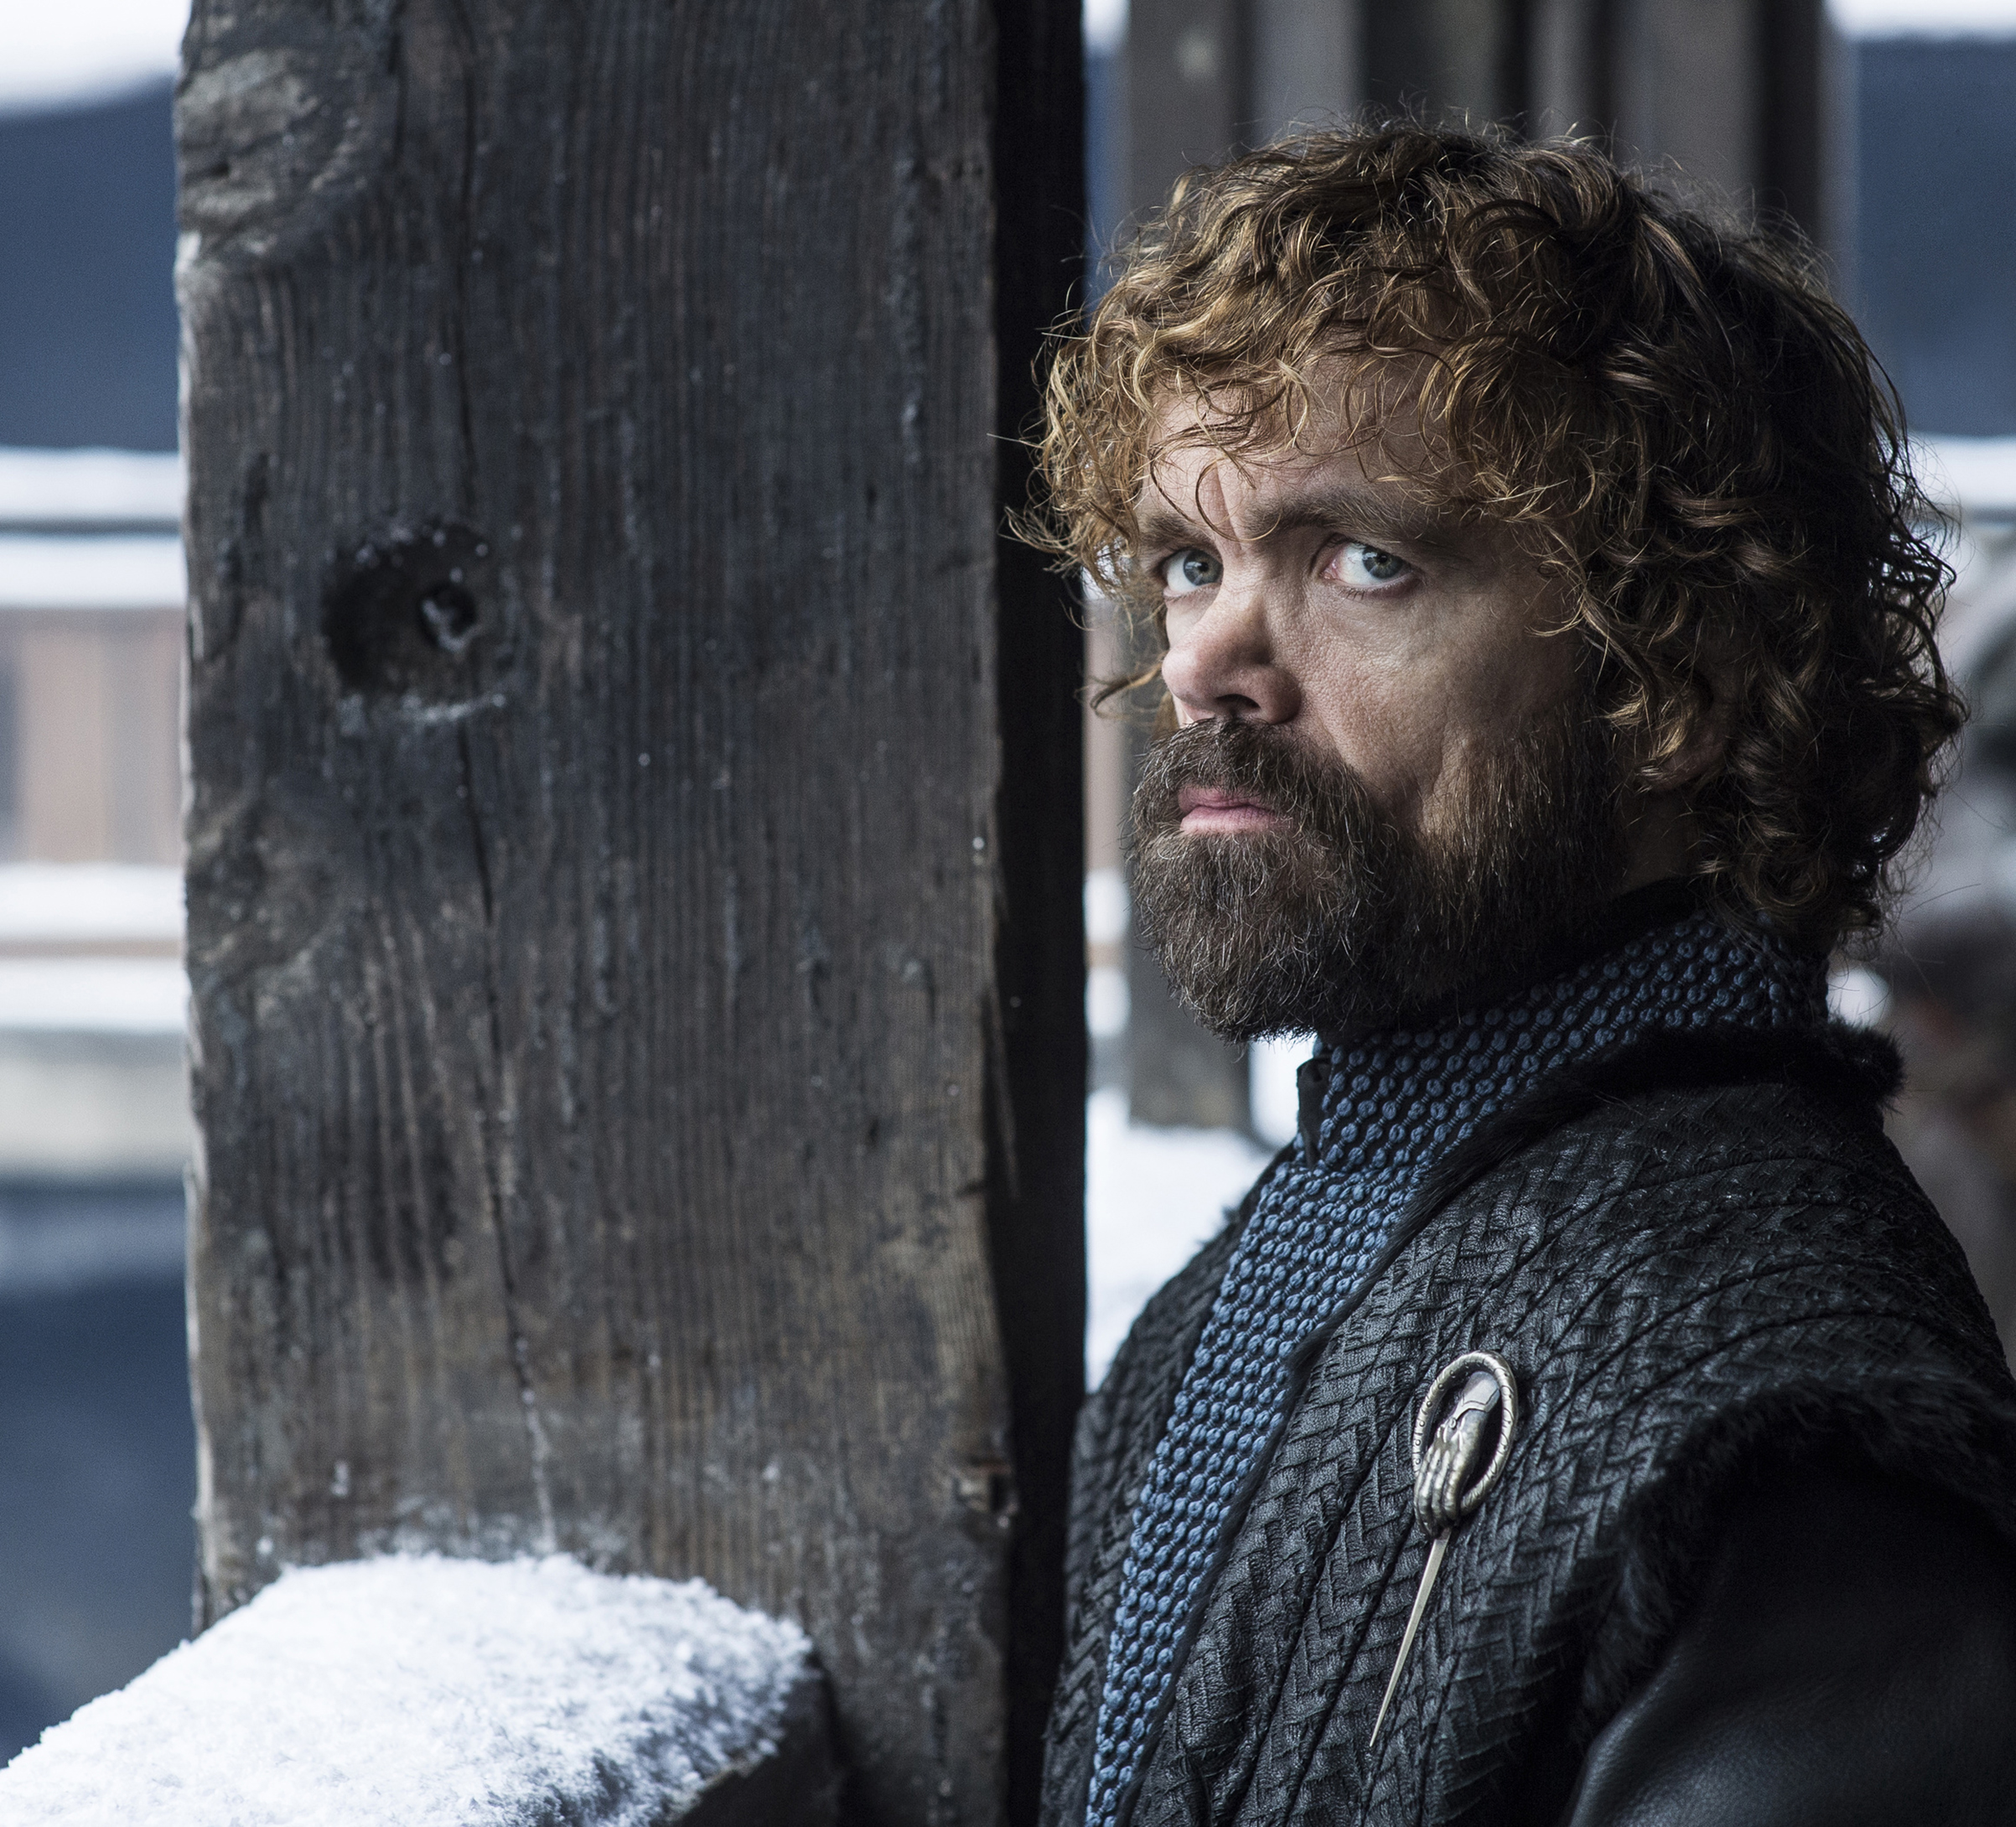 Which Game Of Thrones Character Are You? Tyrion Lannister